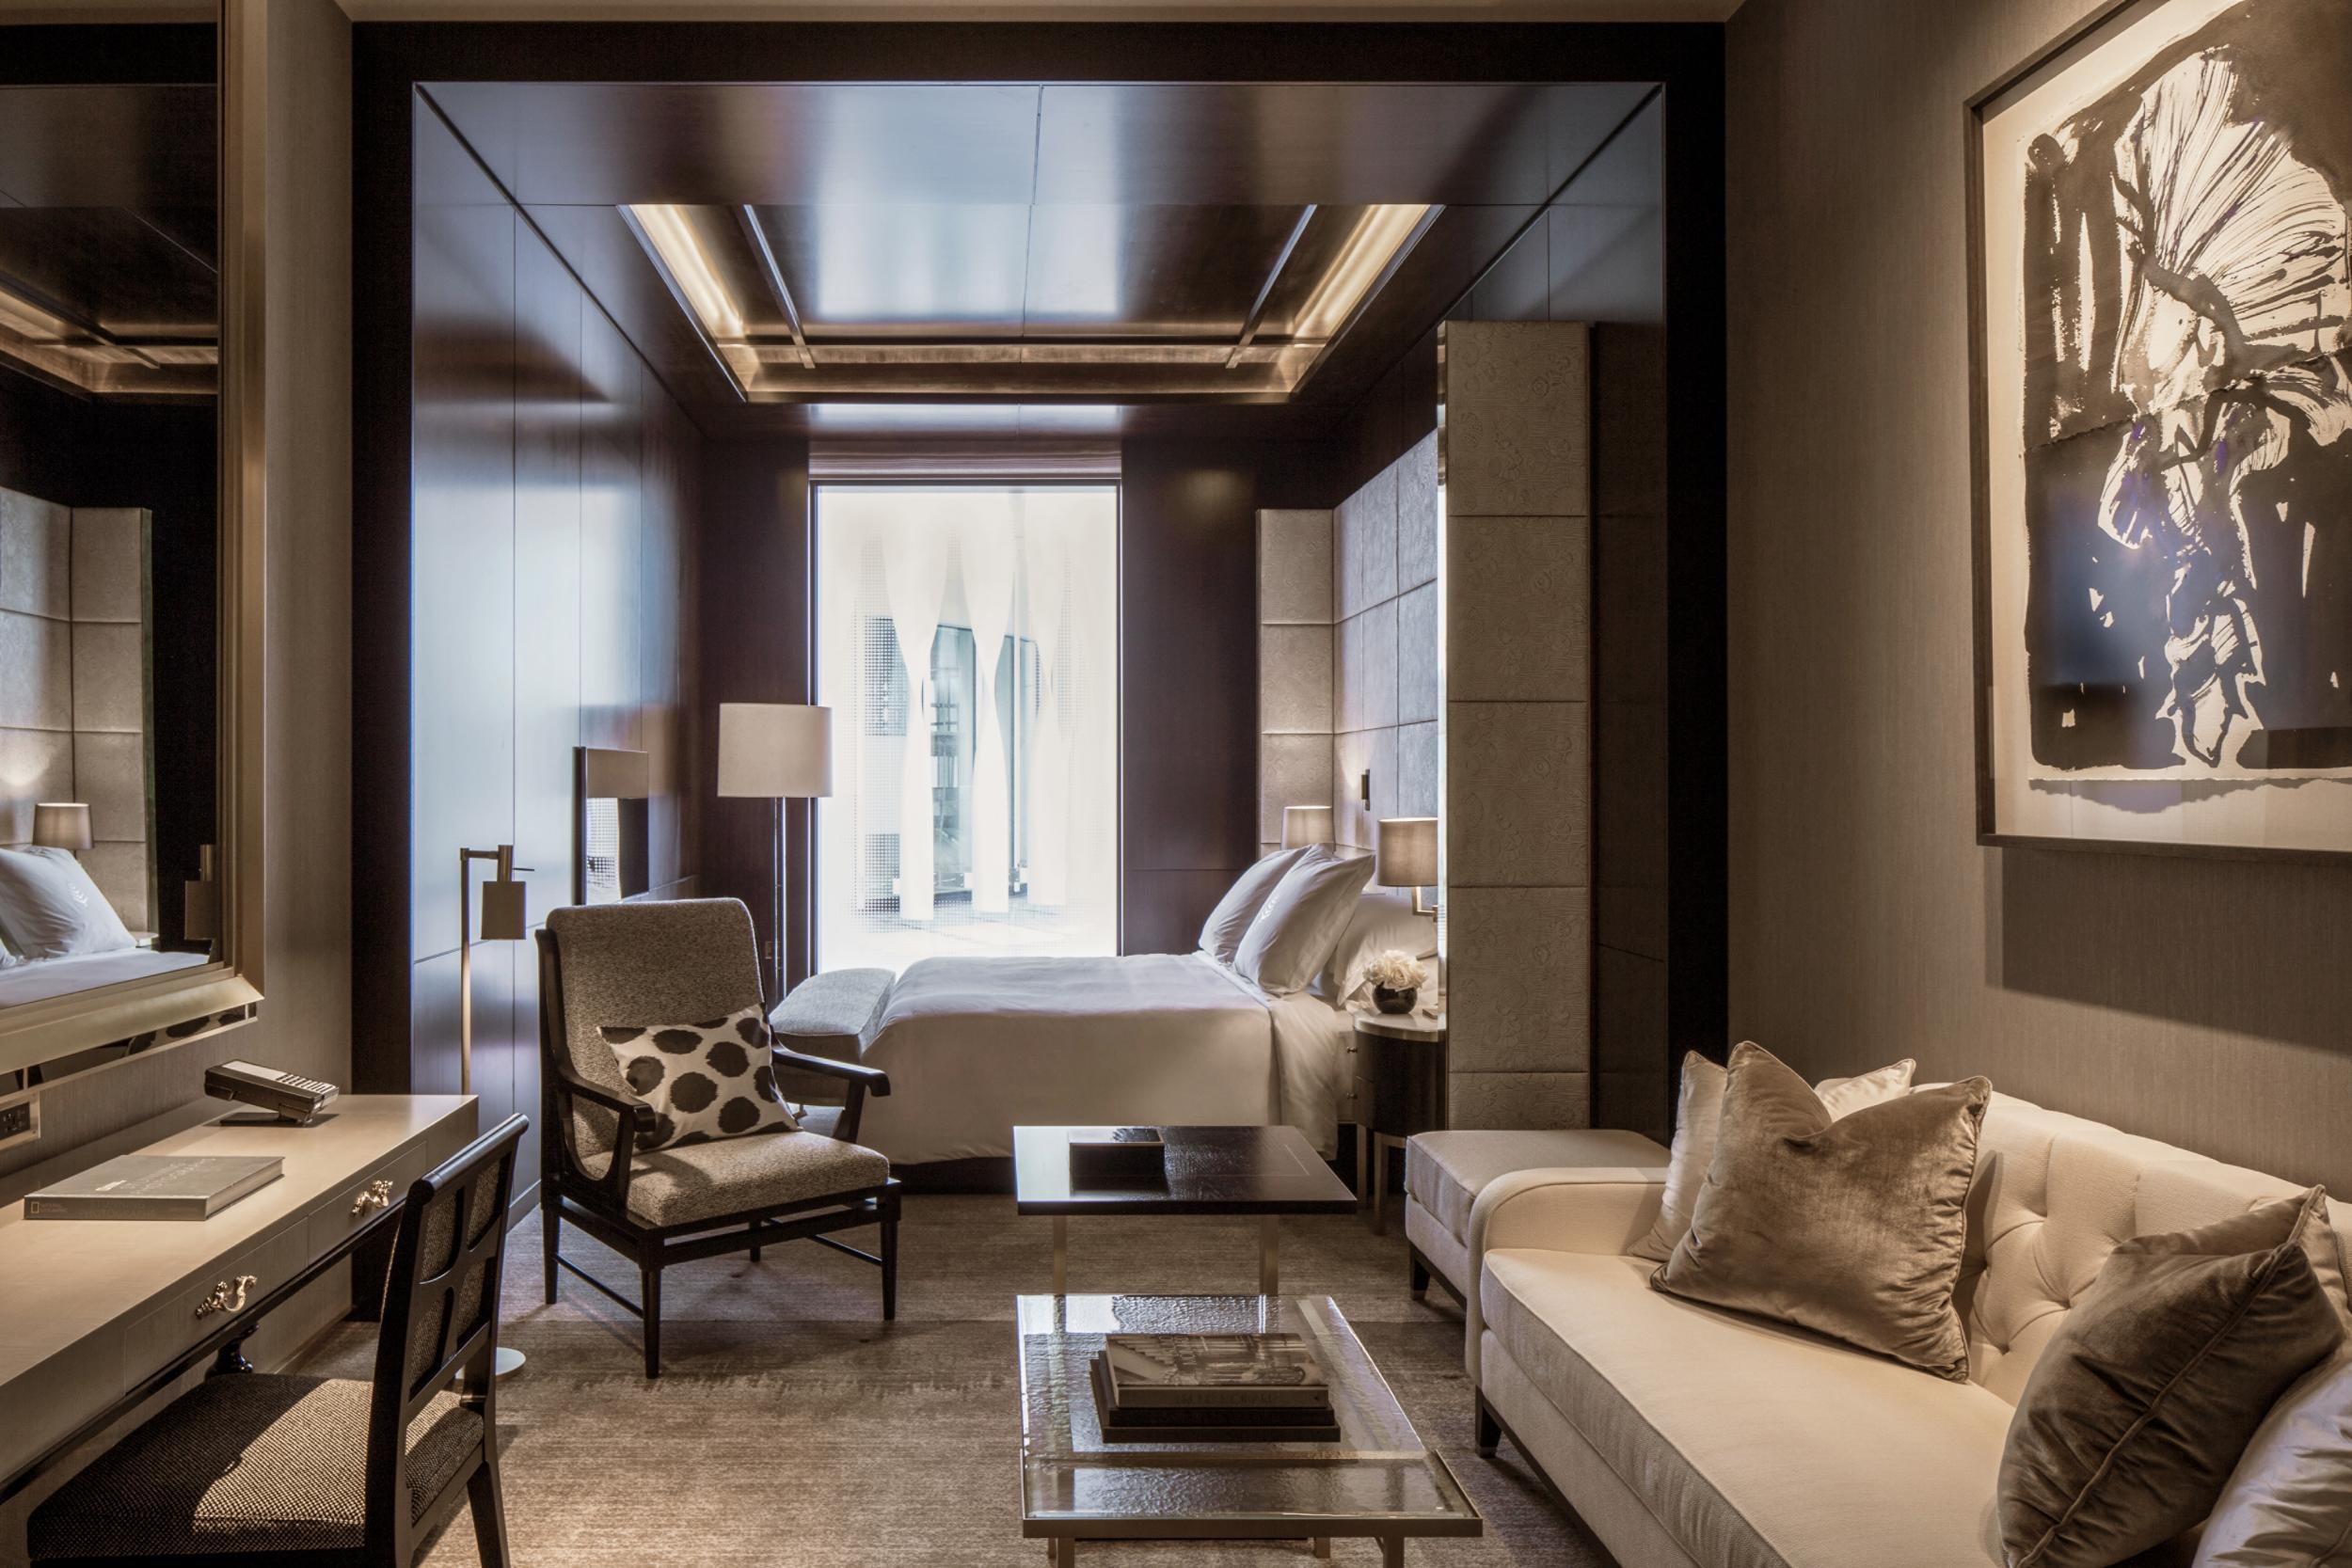 An Executive Room, which offers the tasteful luxury of a Park Avenue apartment